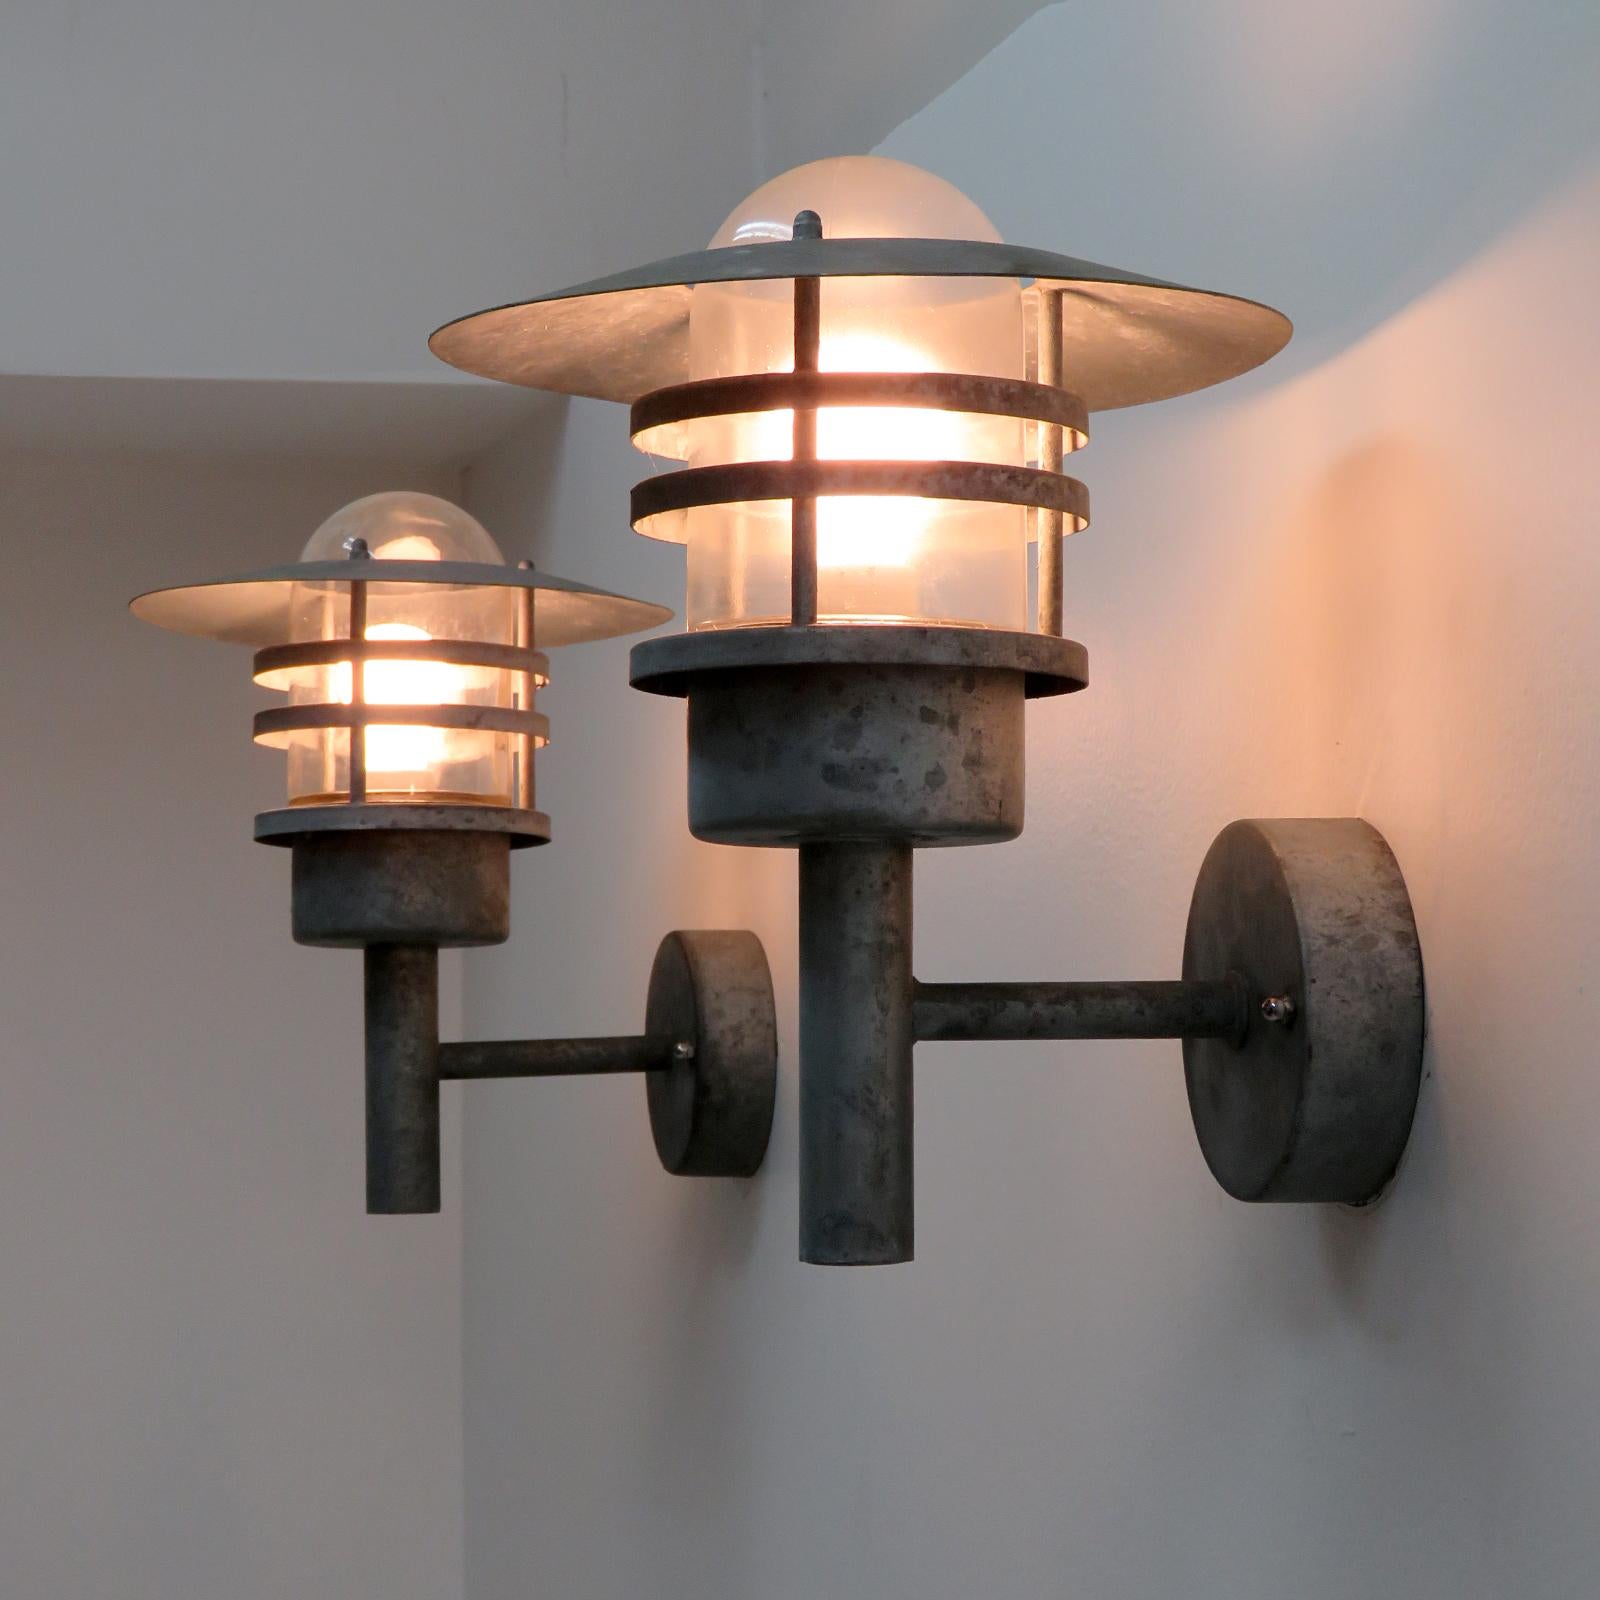 Mid-20th Century Pair of Danish Outdoor Wall Lights by Nordlux